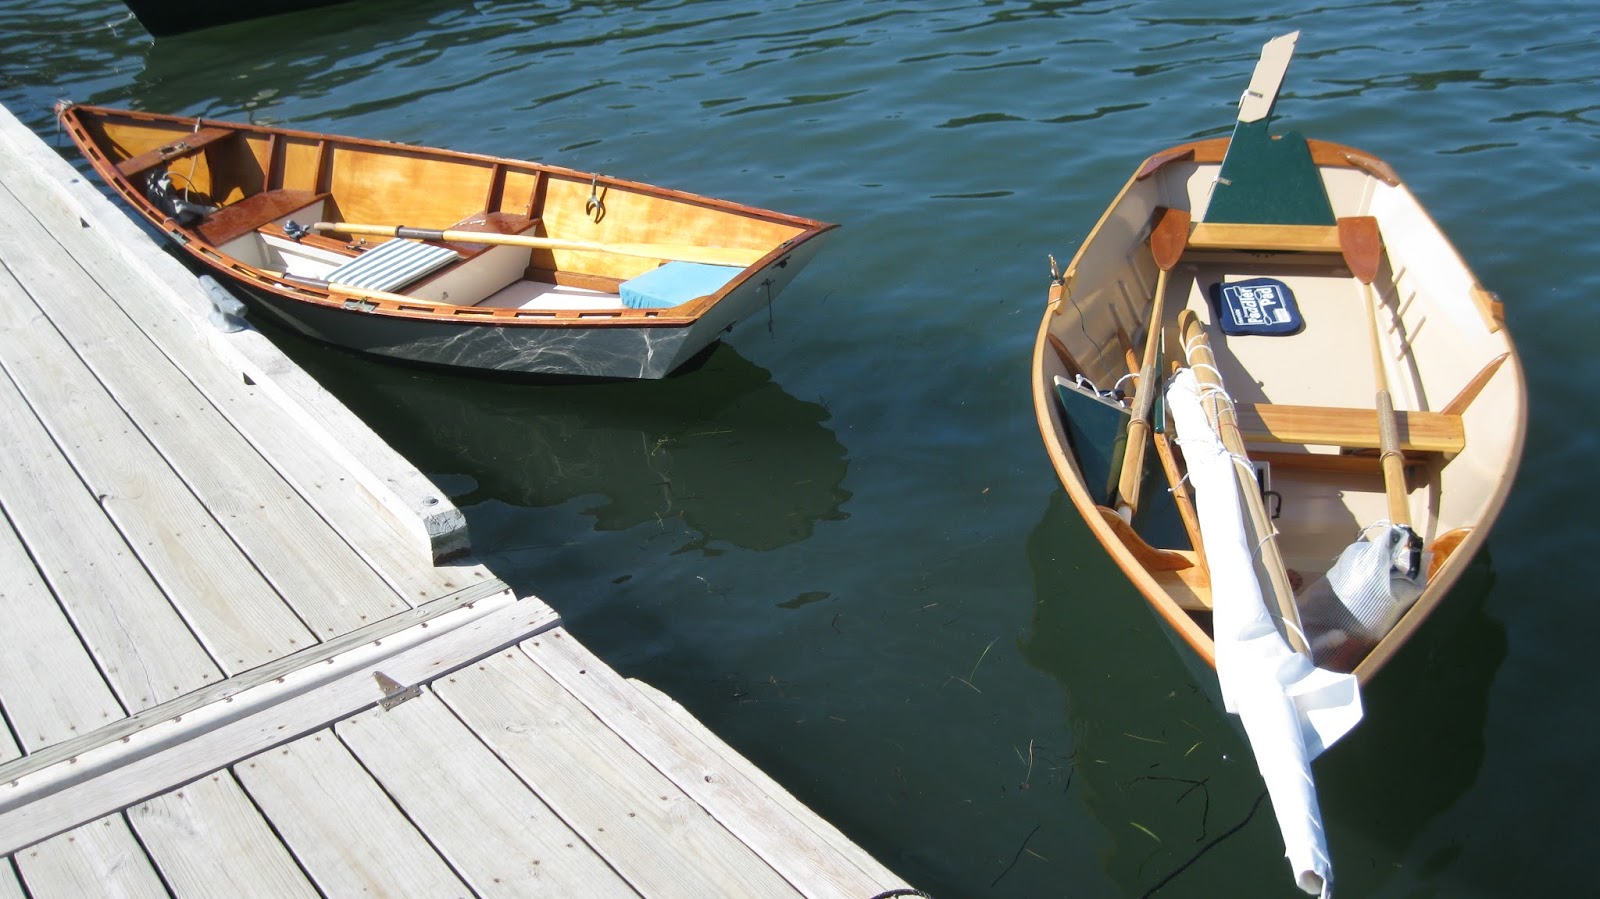 Best Woodworking Plans And Guide: Small Boat Kits Wooden Plans